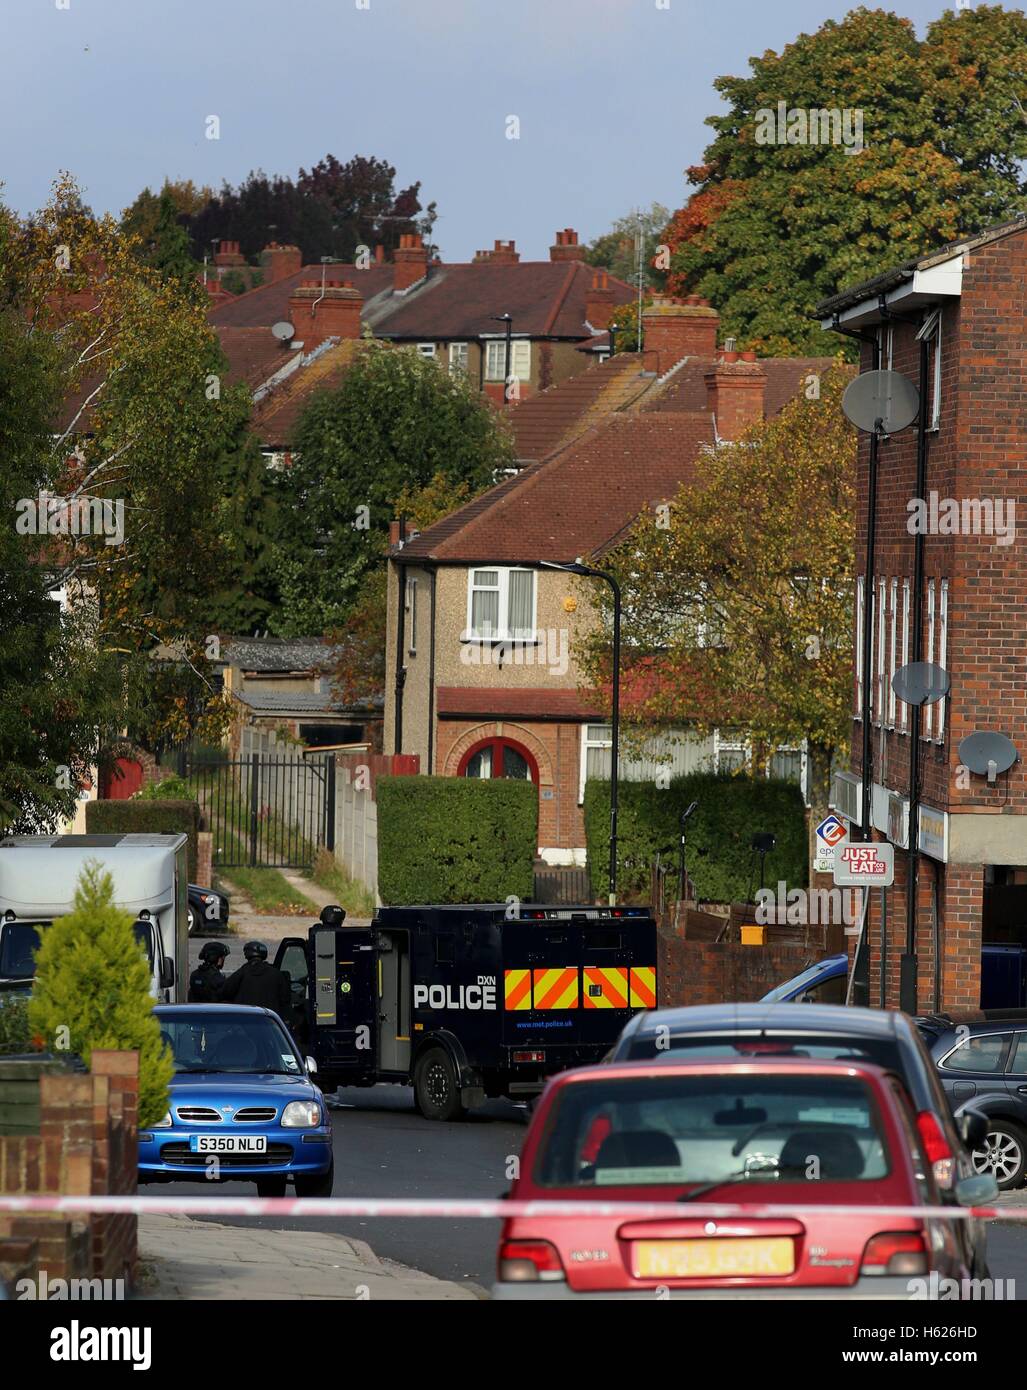 Armed police officers at the scene in Northolt, London, where they remain locked in a stand-off with a man at an address in Wood End Lane, who is said to be in possession of dangerous items including petrol and combustibles. Stock Photo